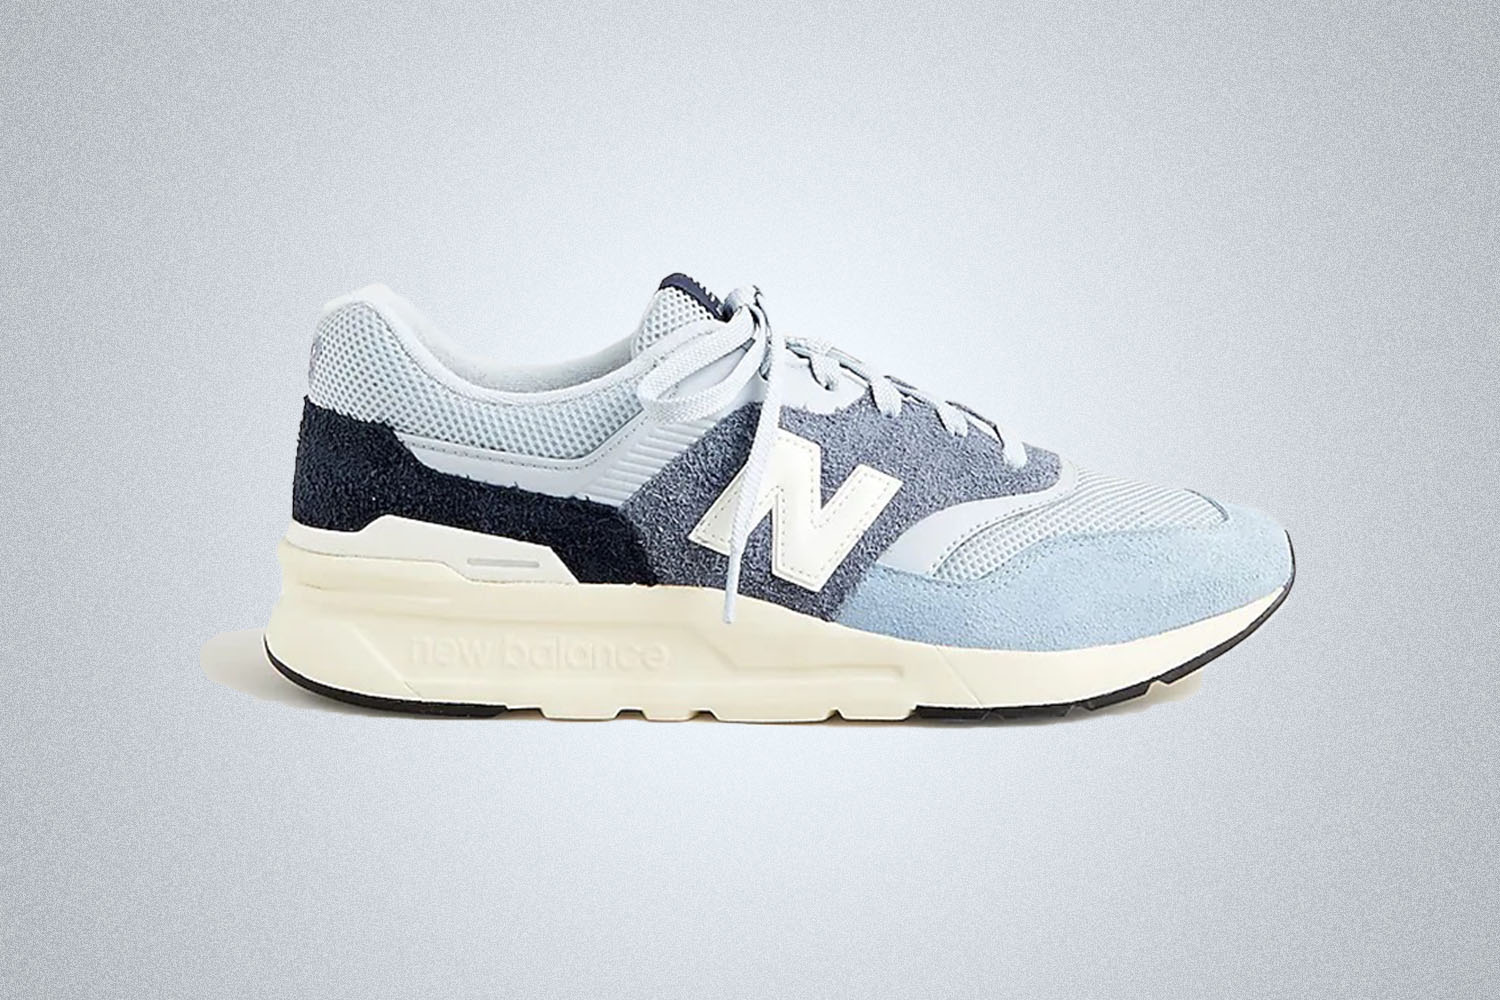 New Balance Models: The Complete Guide From 574 to 990 - InsideHook